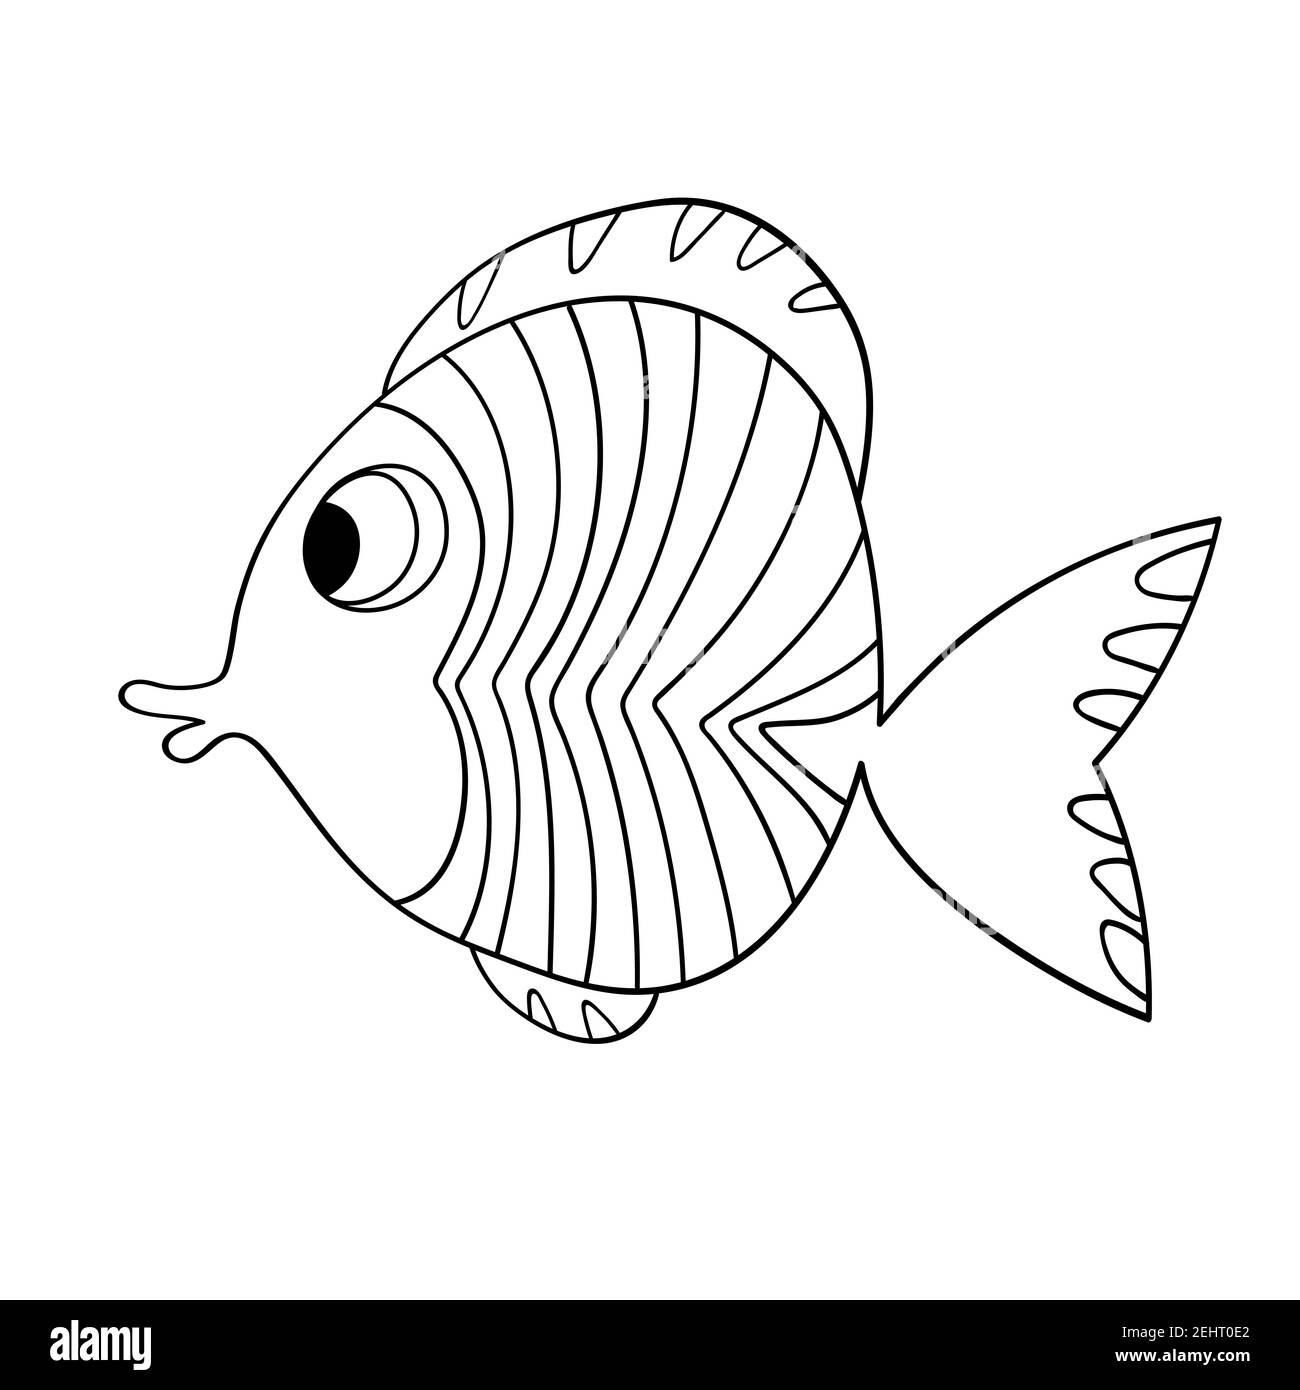 Cartoon cute fish. Hand drawing outline colouring pictures. Isolated items. Suitable for children's coloring and prints. Adorable character for card Stock Vector